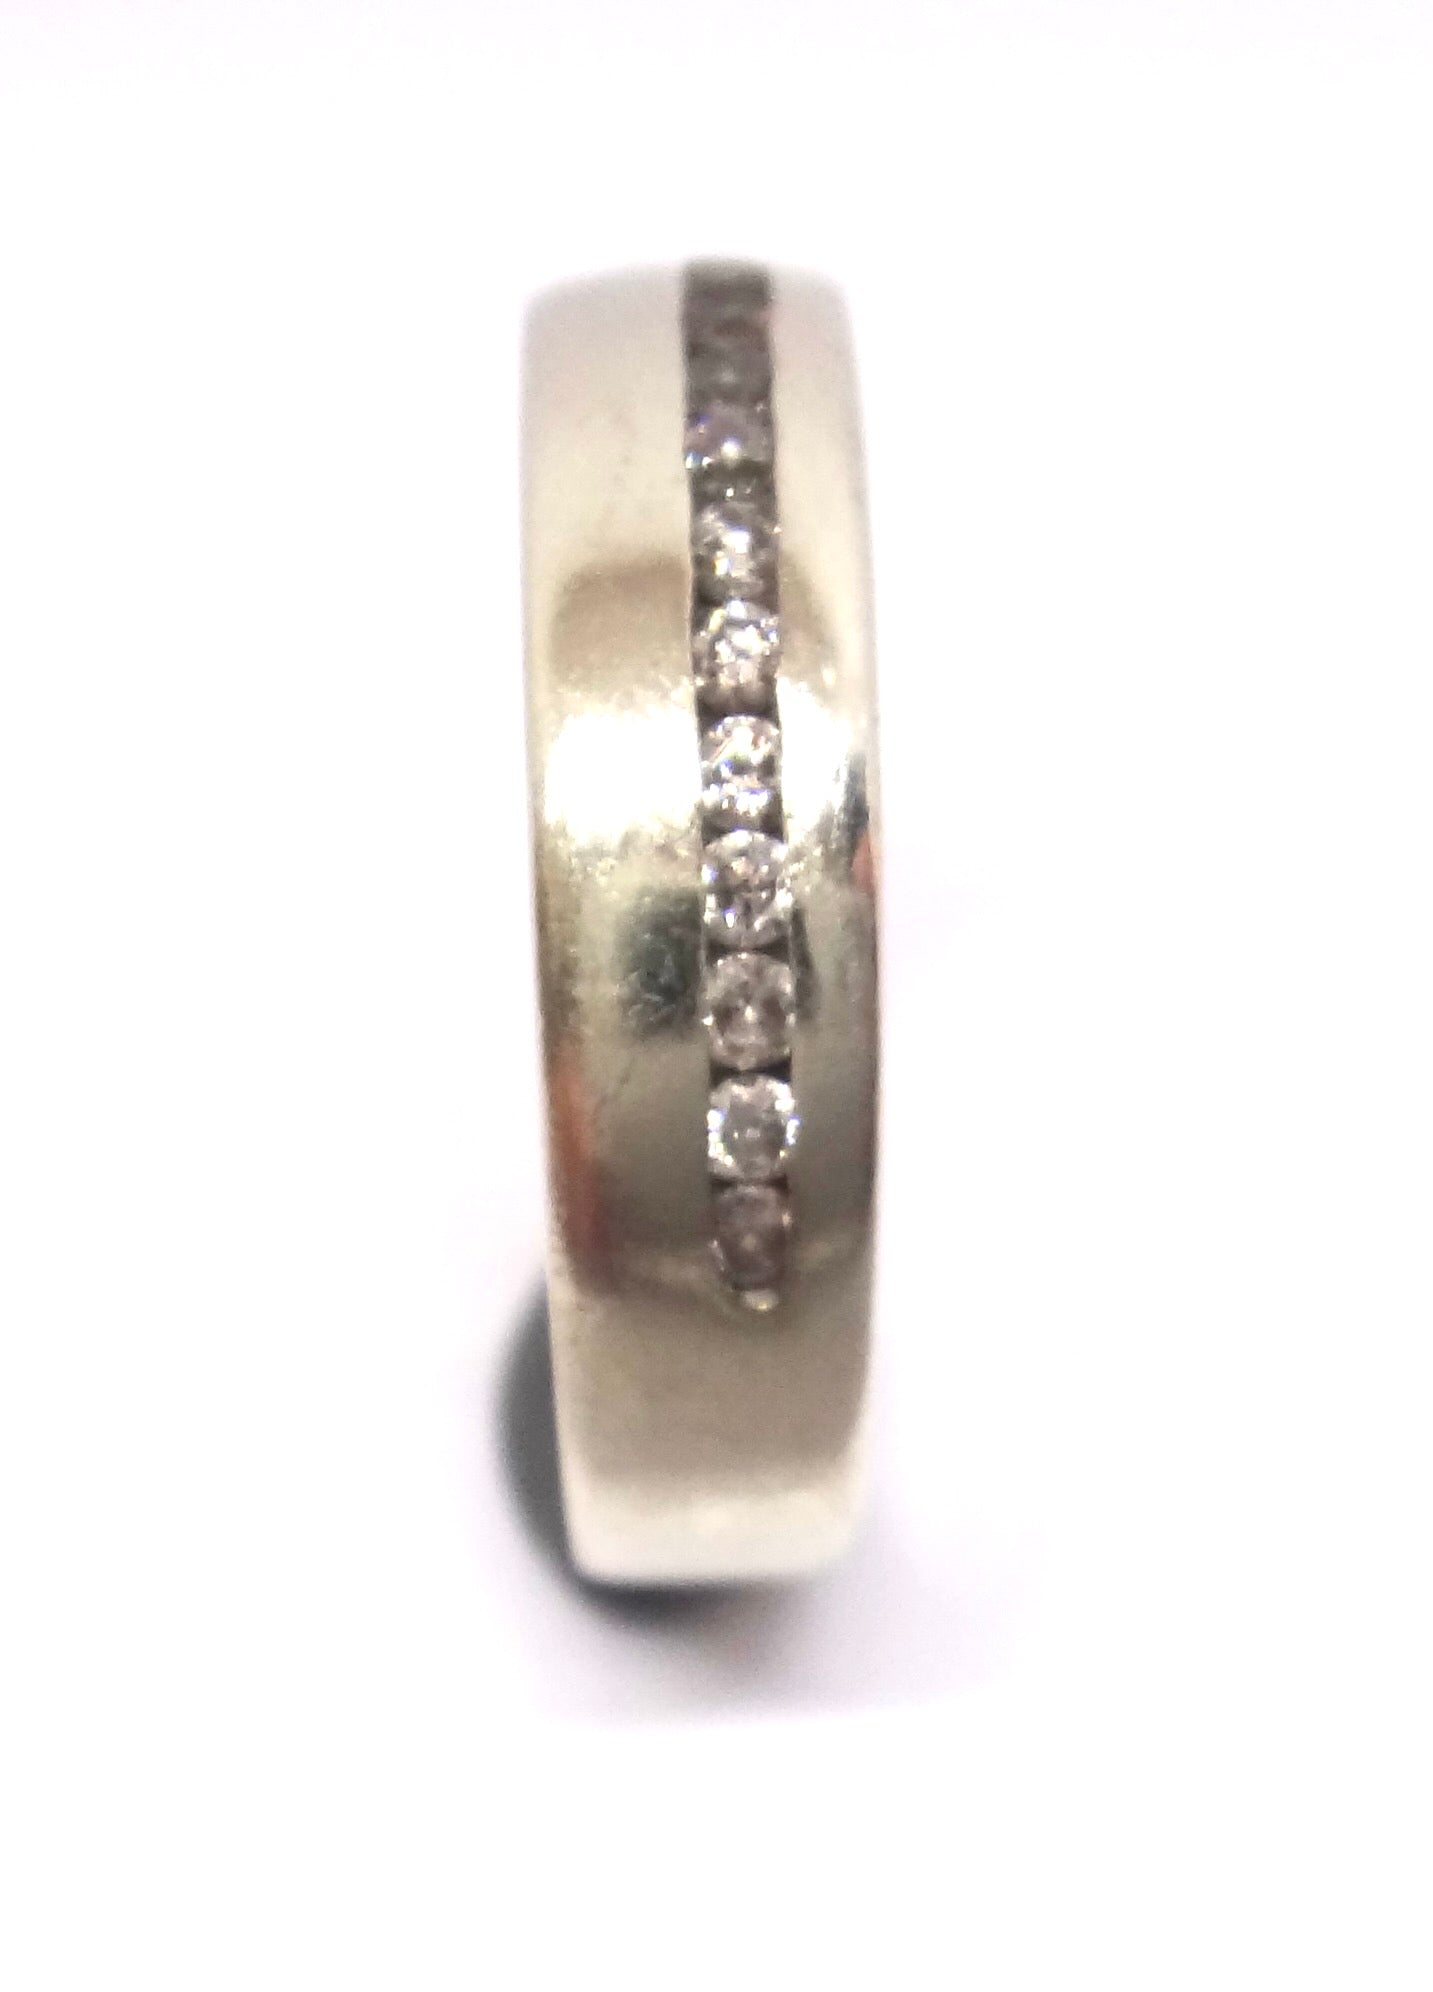 9CT White GOLD & Channel Set Diamond Band Ring